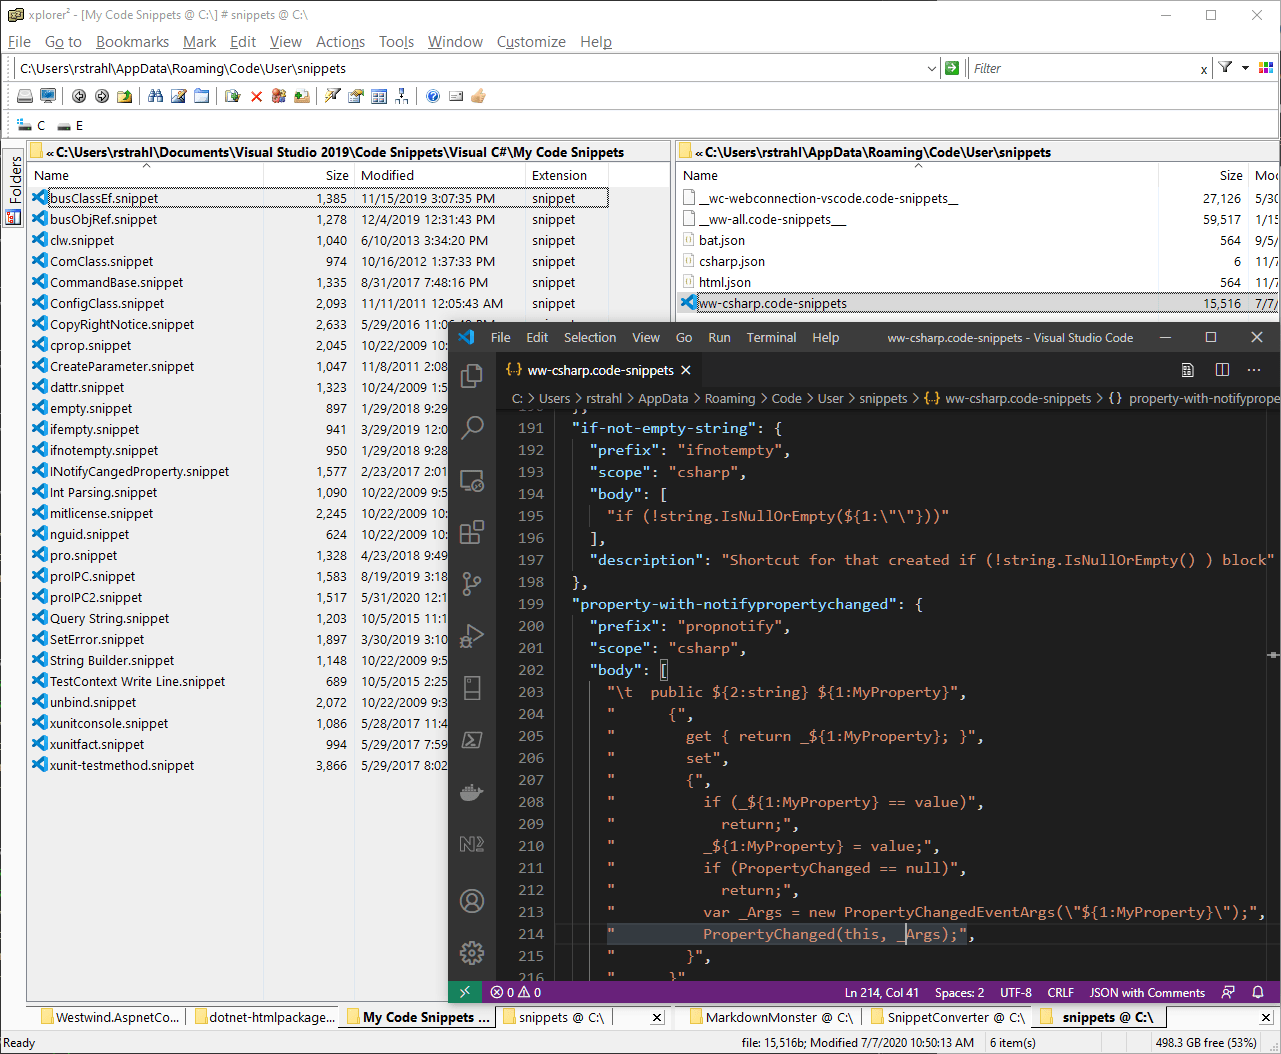 Figure 11: Migrated code snippets from the Snippet Converter in VS Code